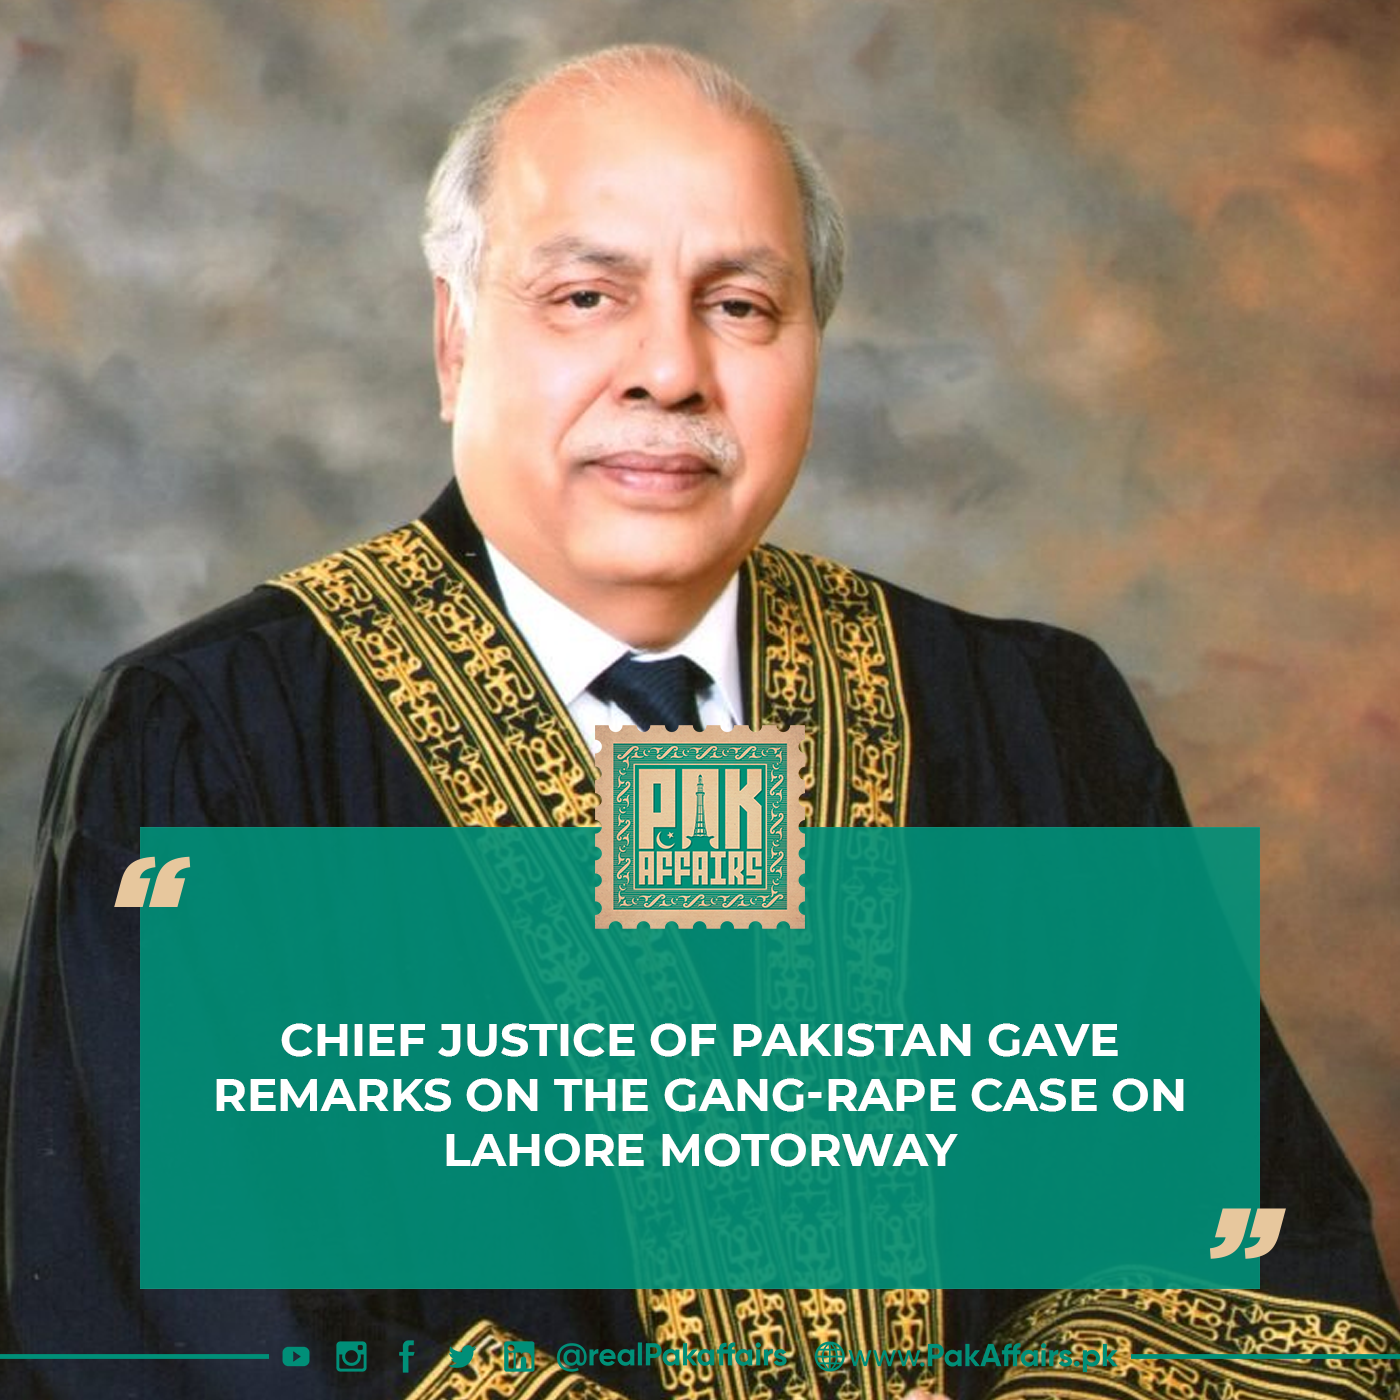 Chief Justice of Pakistan Gave Remarks on the gang-rape case on Lahore motorway